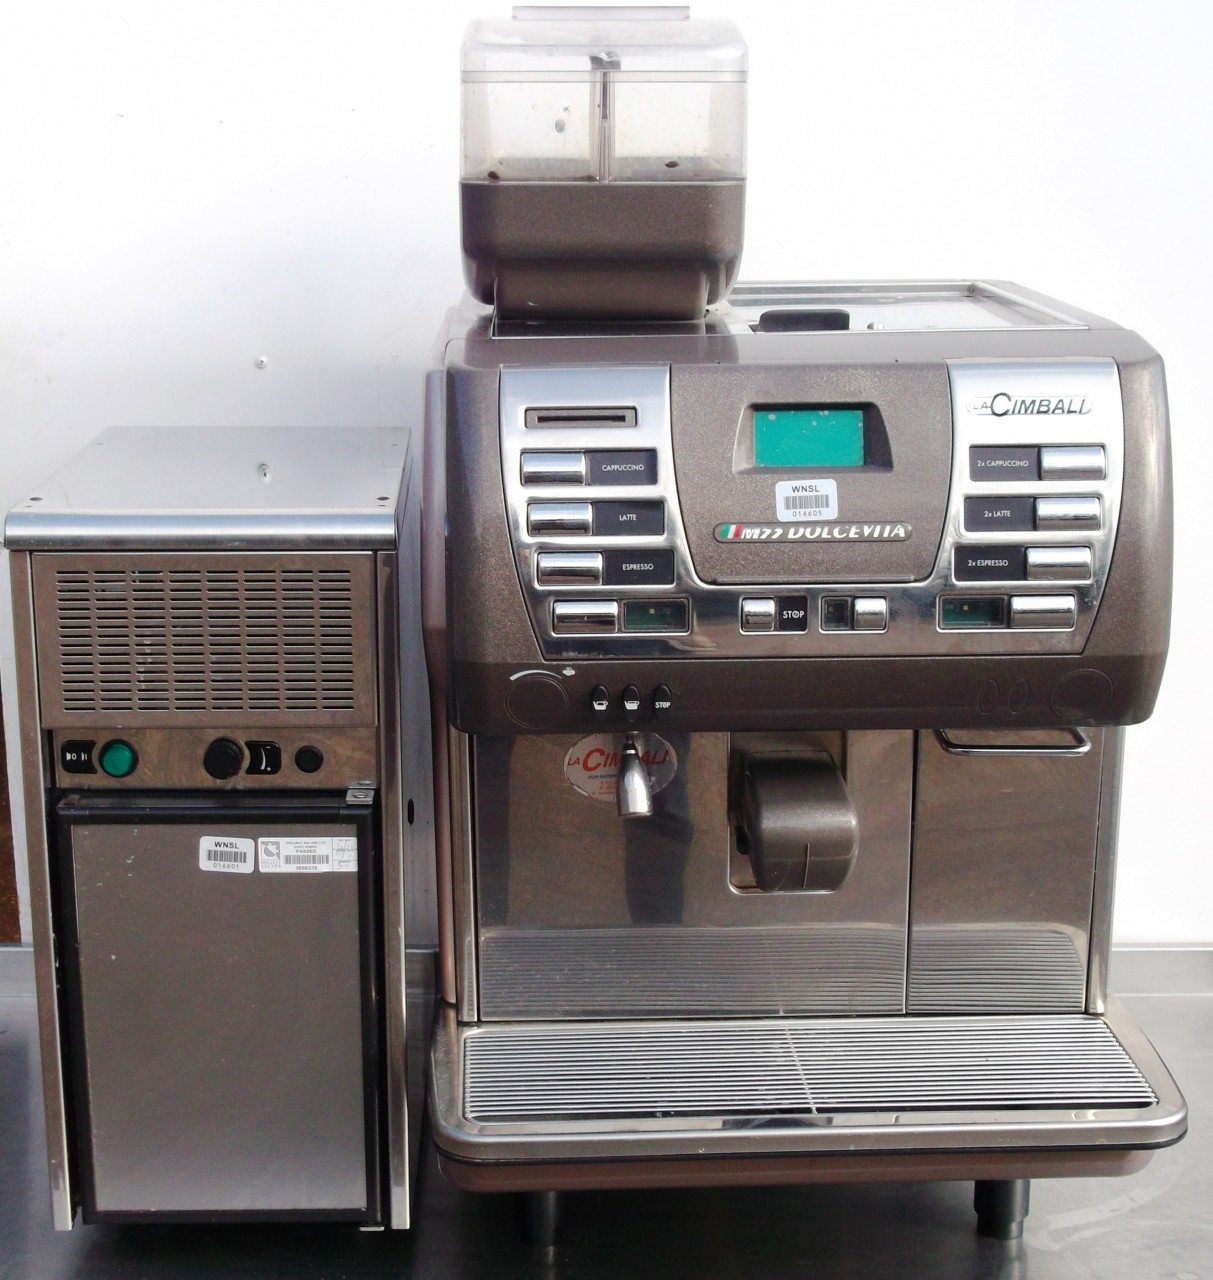 LA CIMBALI Automatic Bean to Cup Coffee Brewer 1